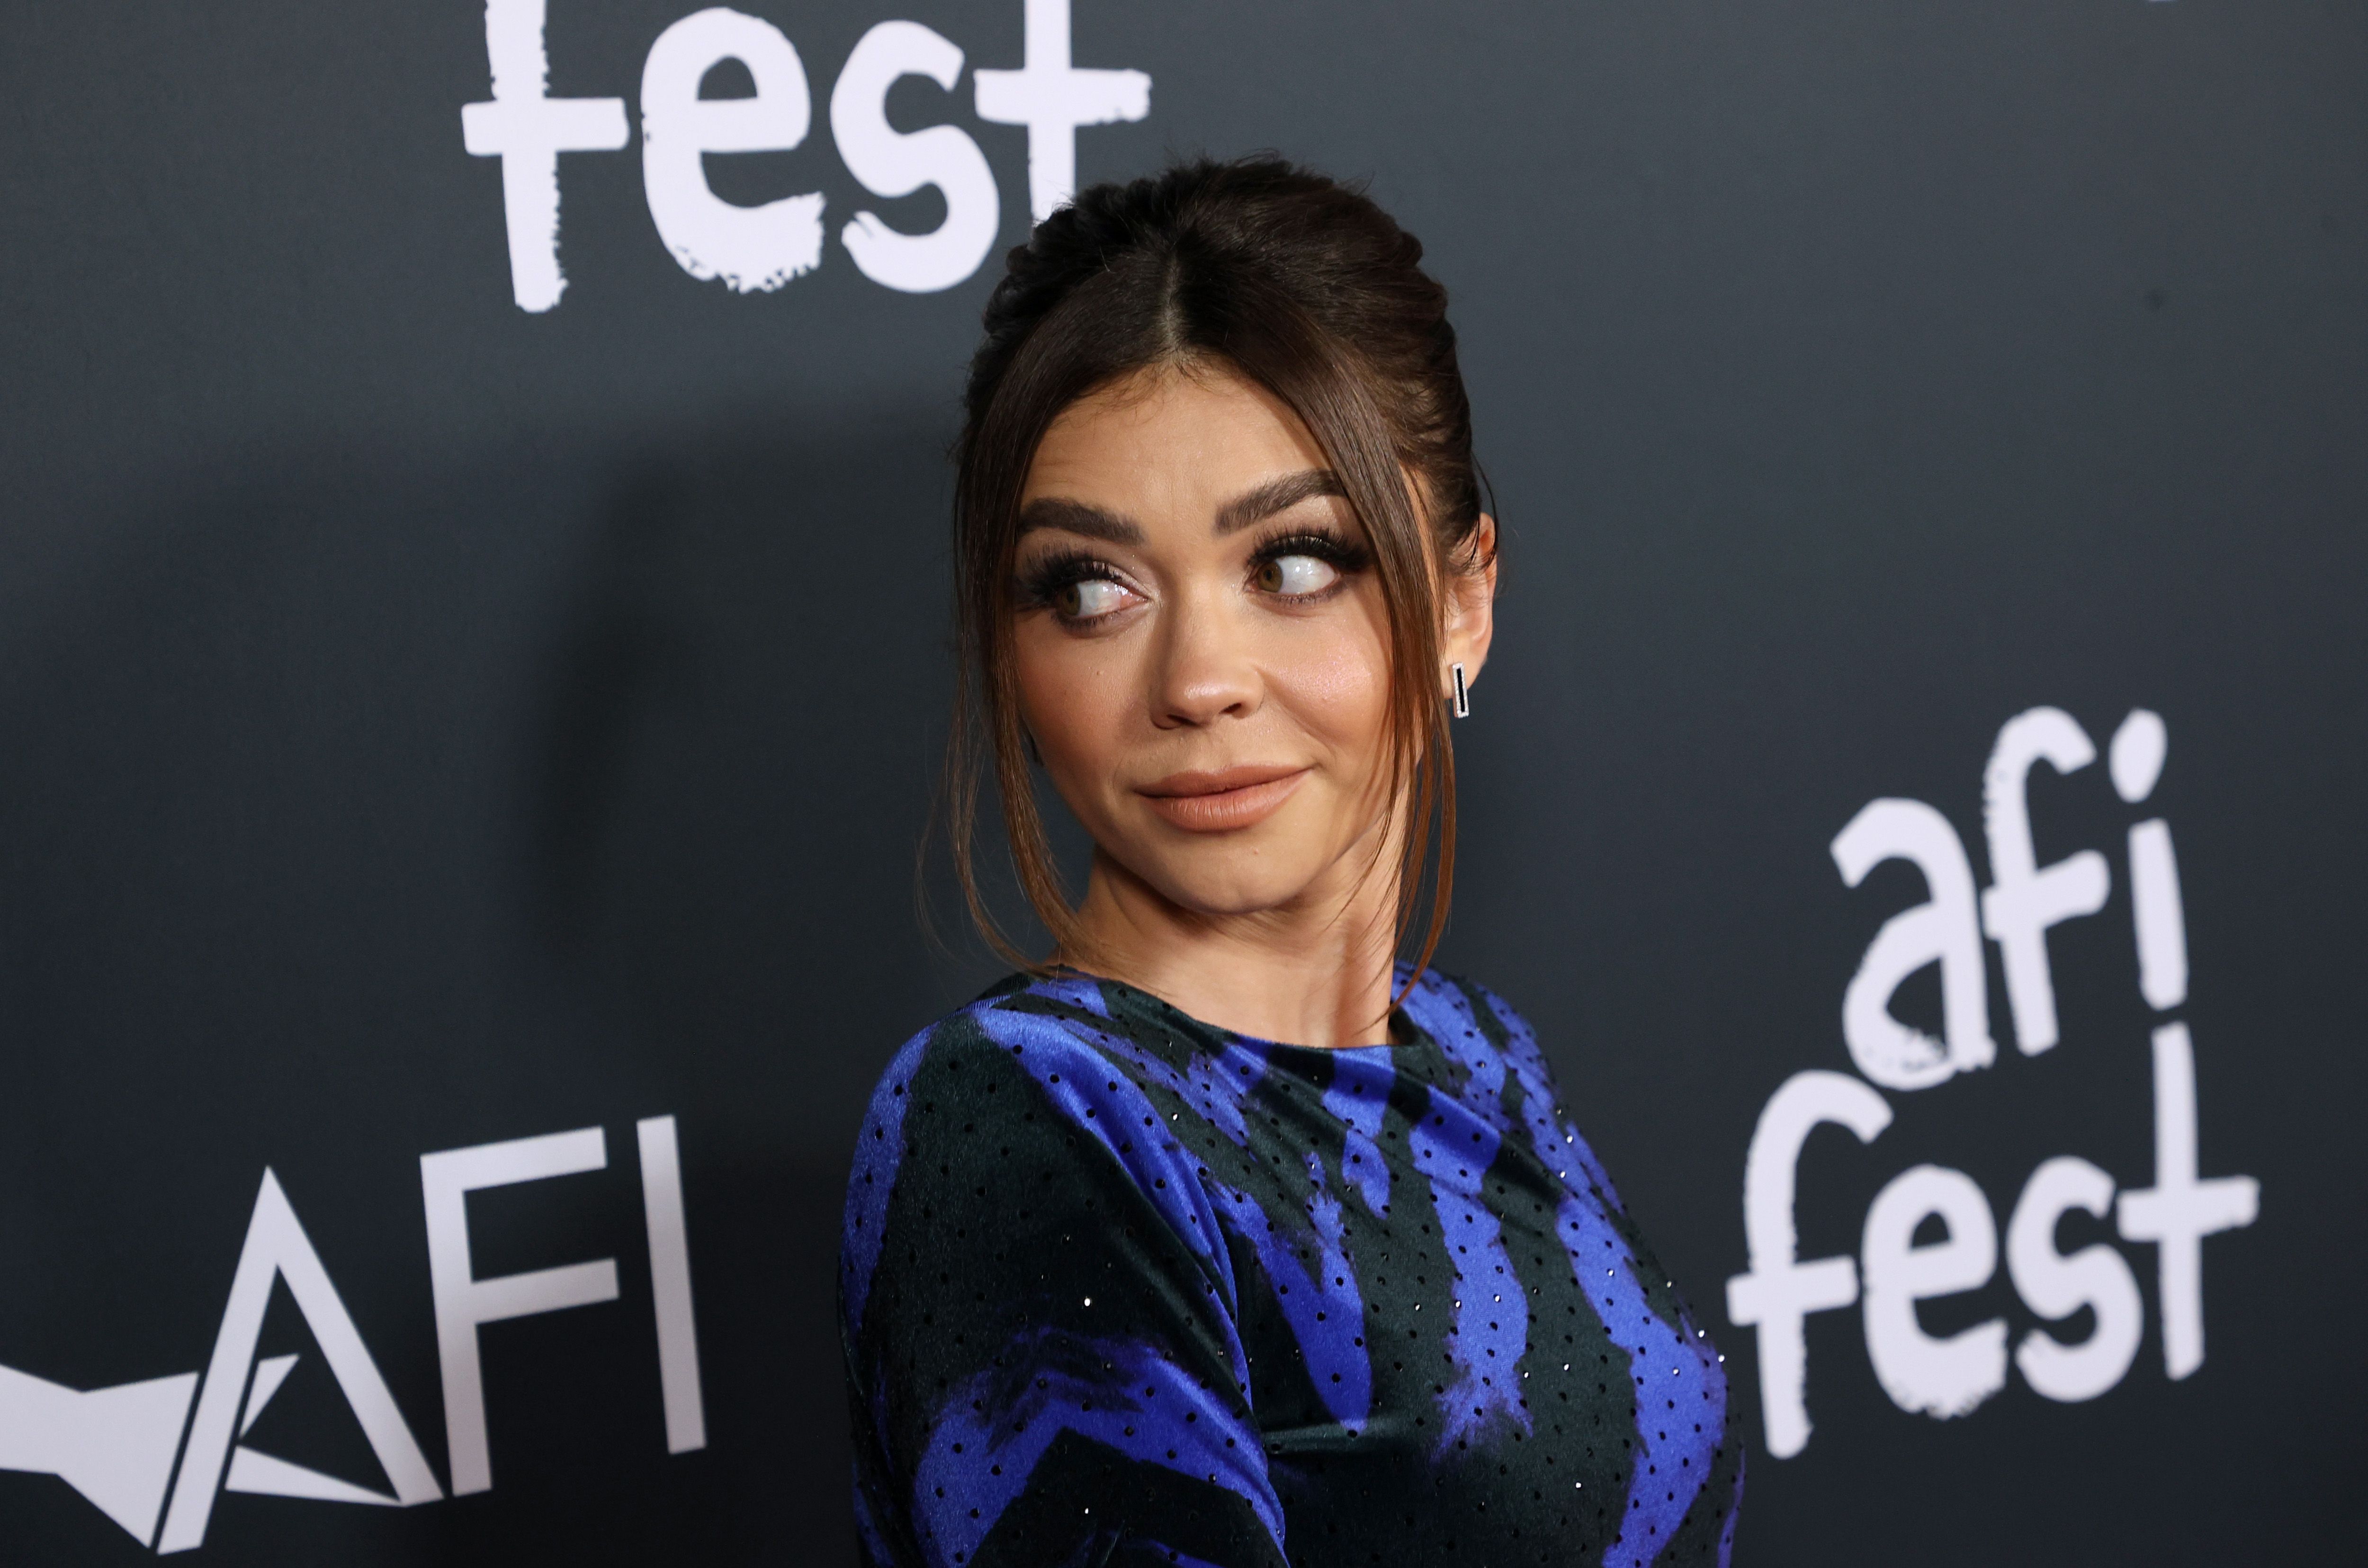 sarah hyland has previously opened up about living with endometriosis